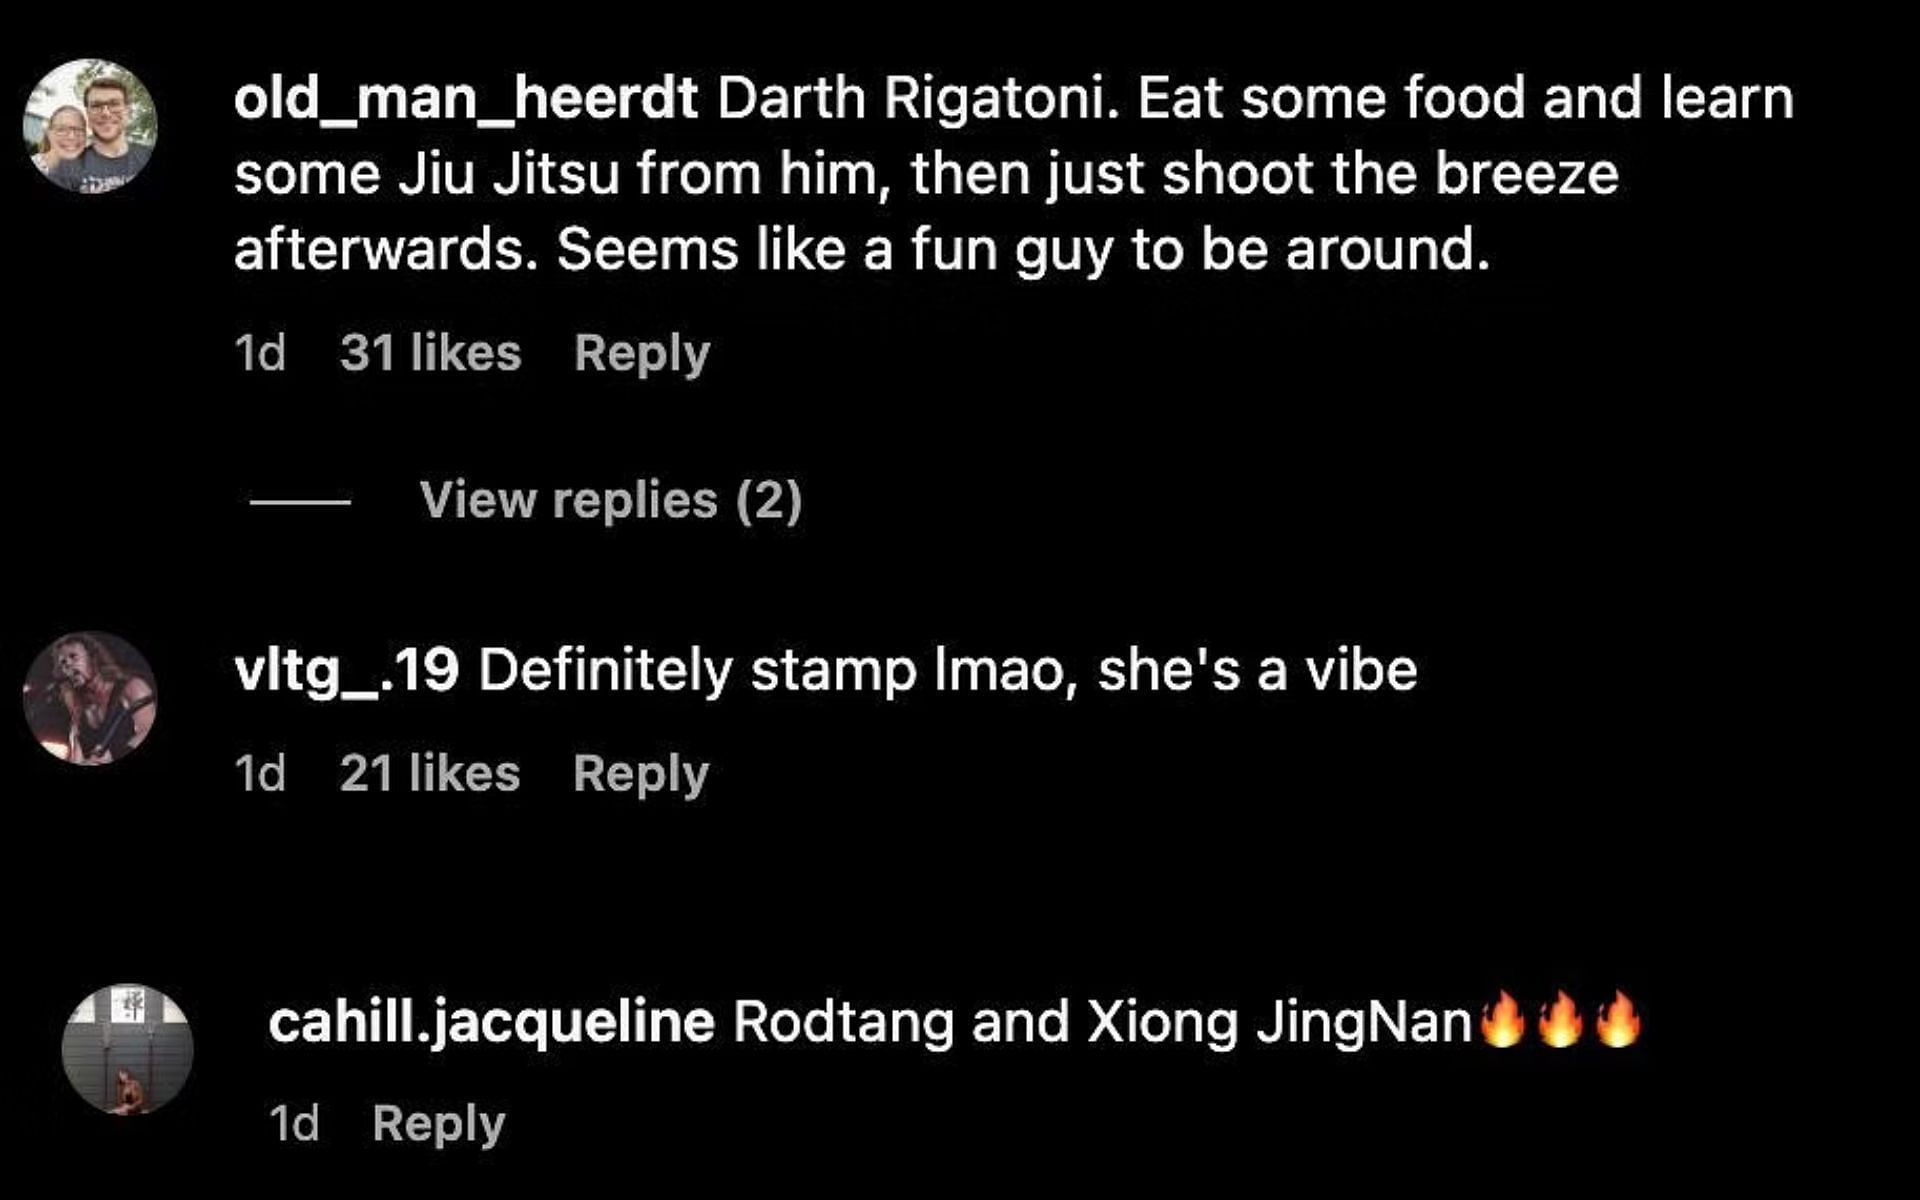 Comments on ONE Championship&#039;s video post